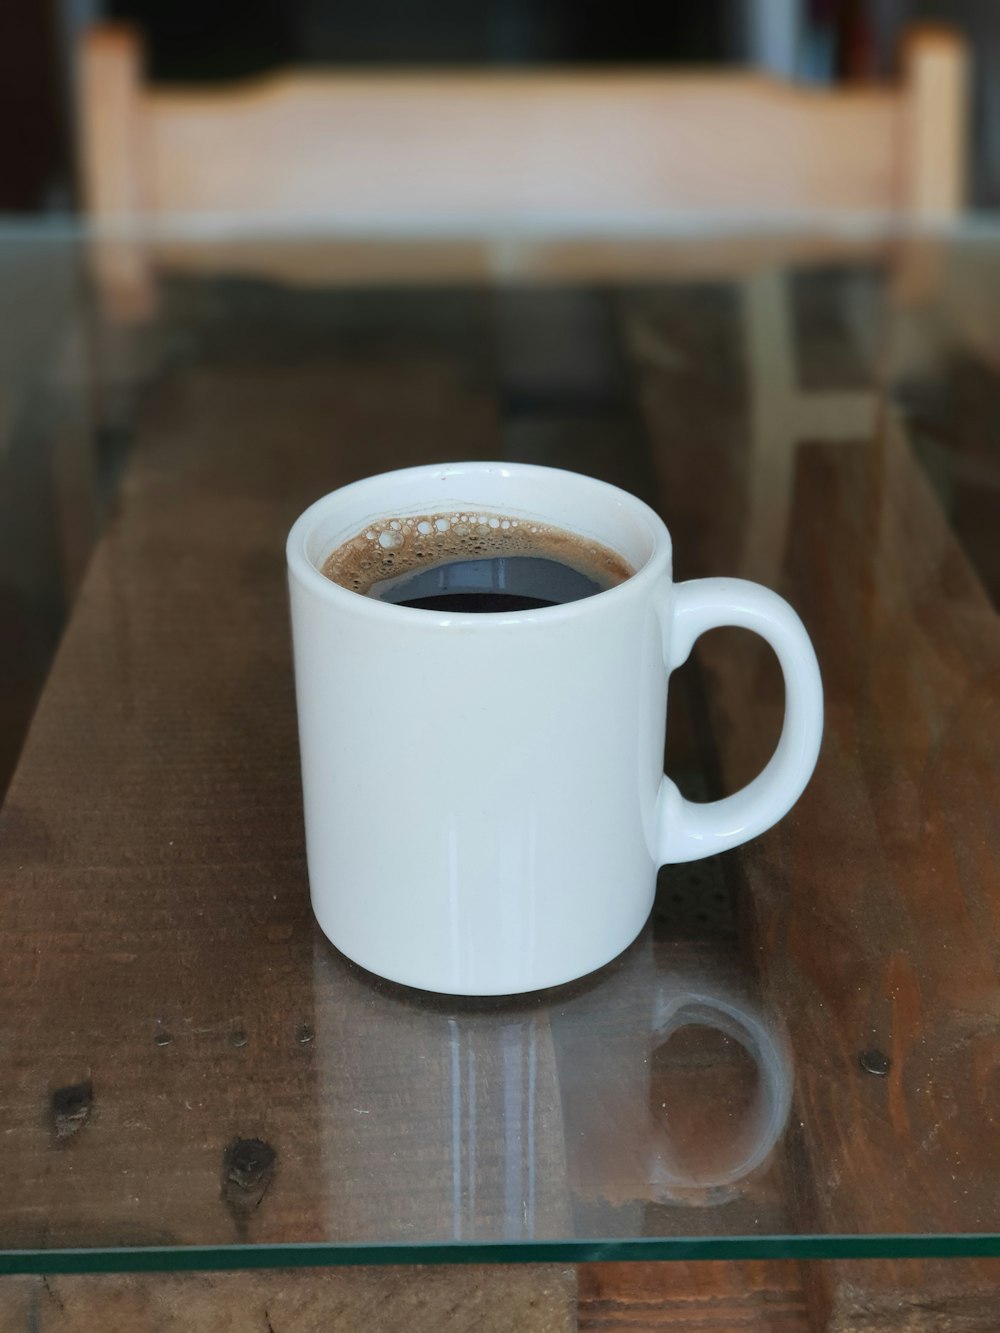 mug of coffee on glass-surface table close-up photography